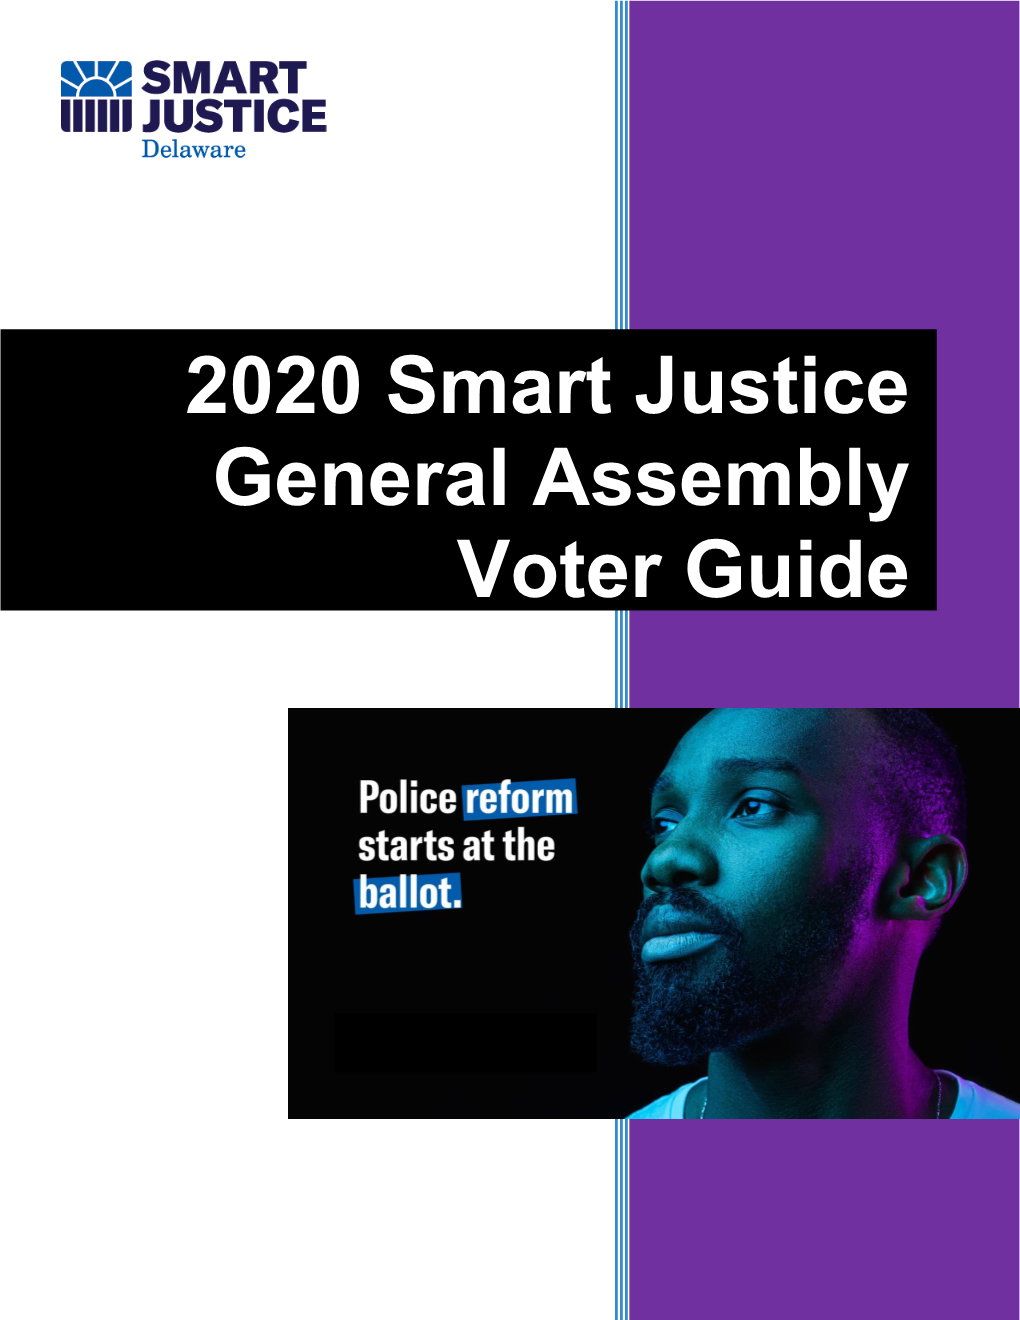 Or Click Here to Check out the Pdf of Their 2020 Smart Justice General Assembly General